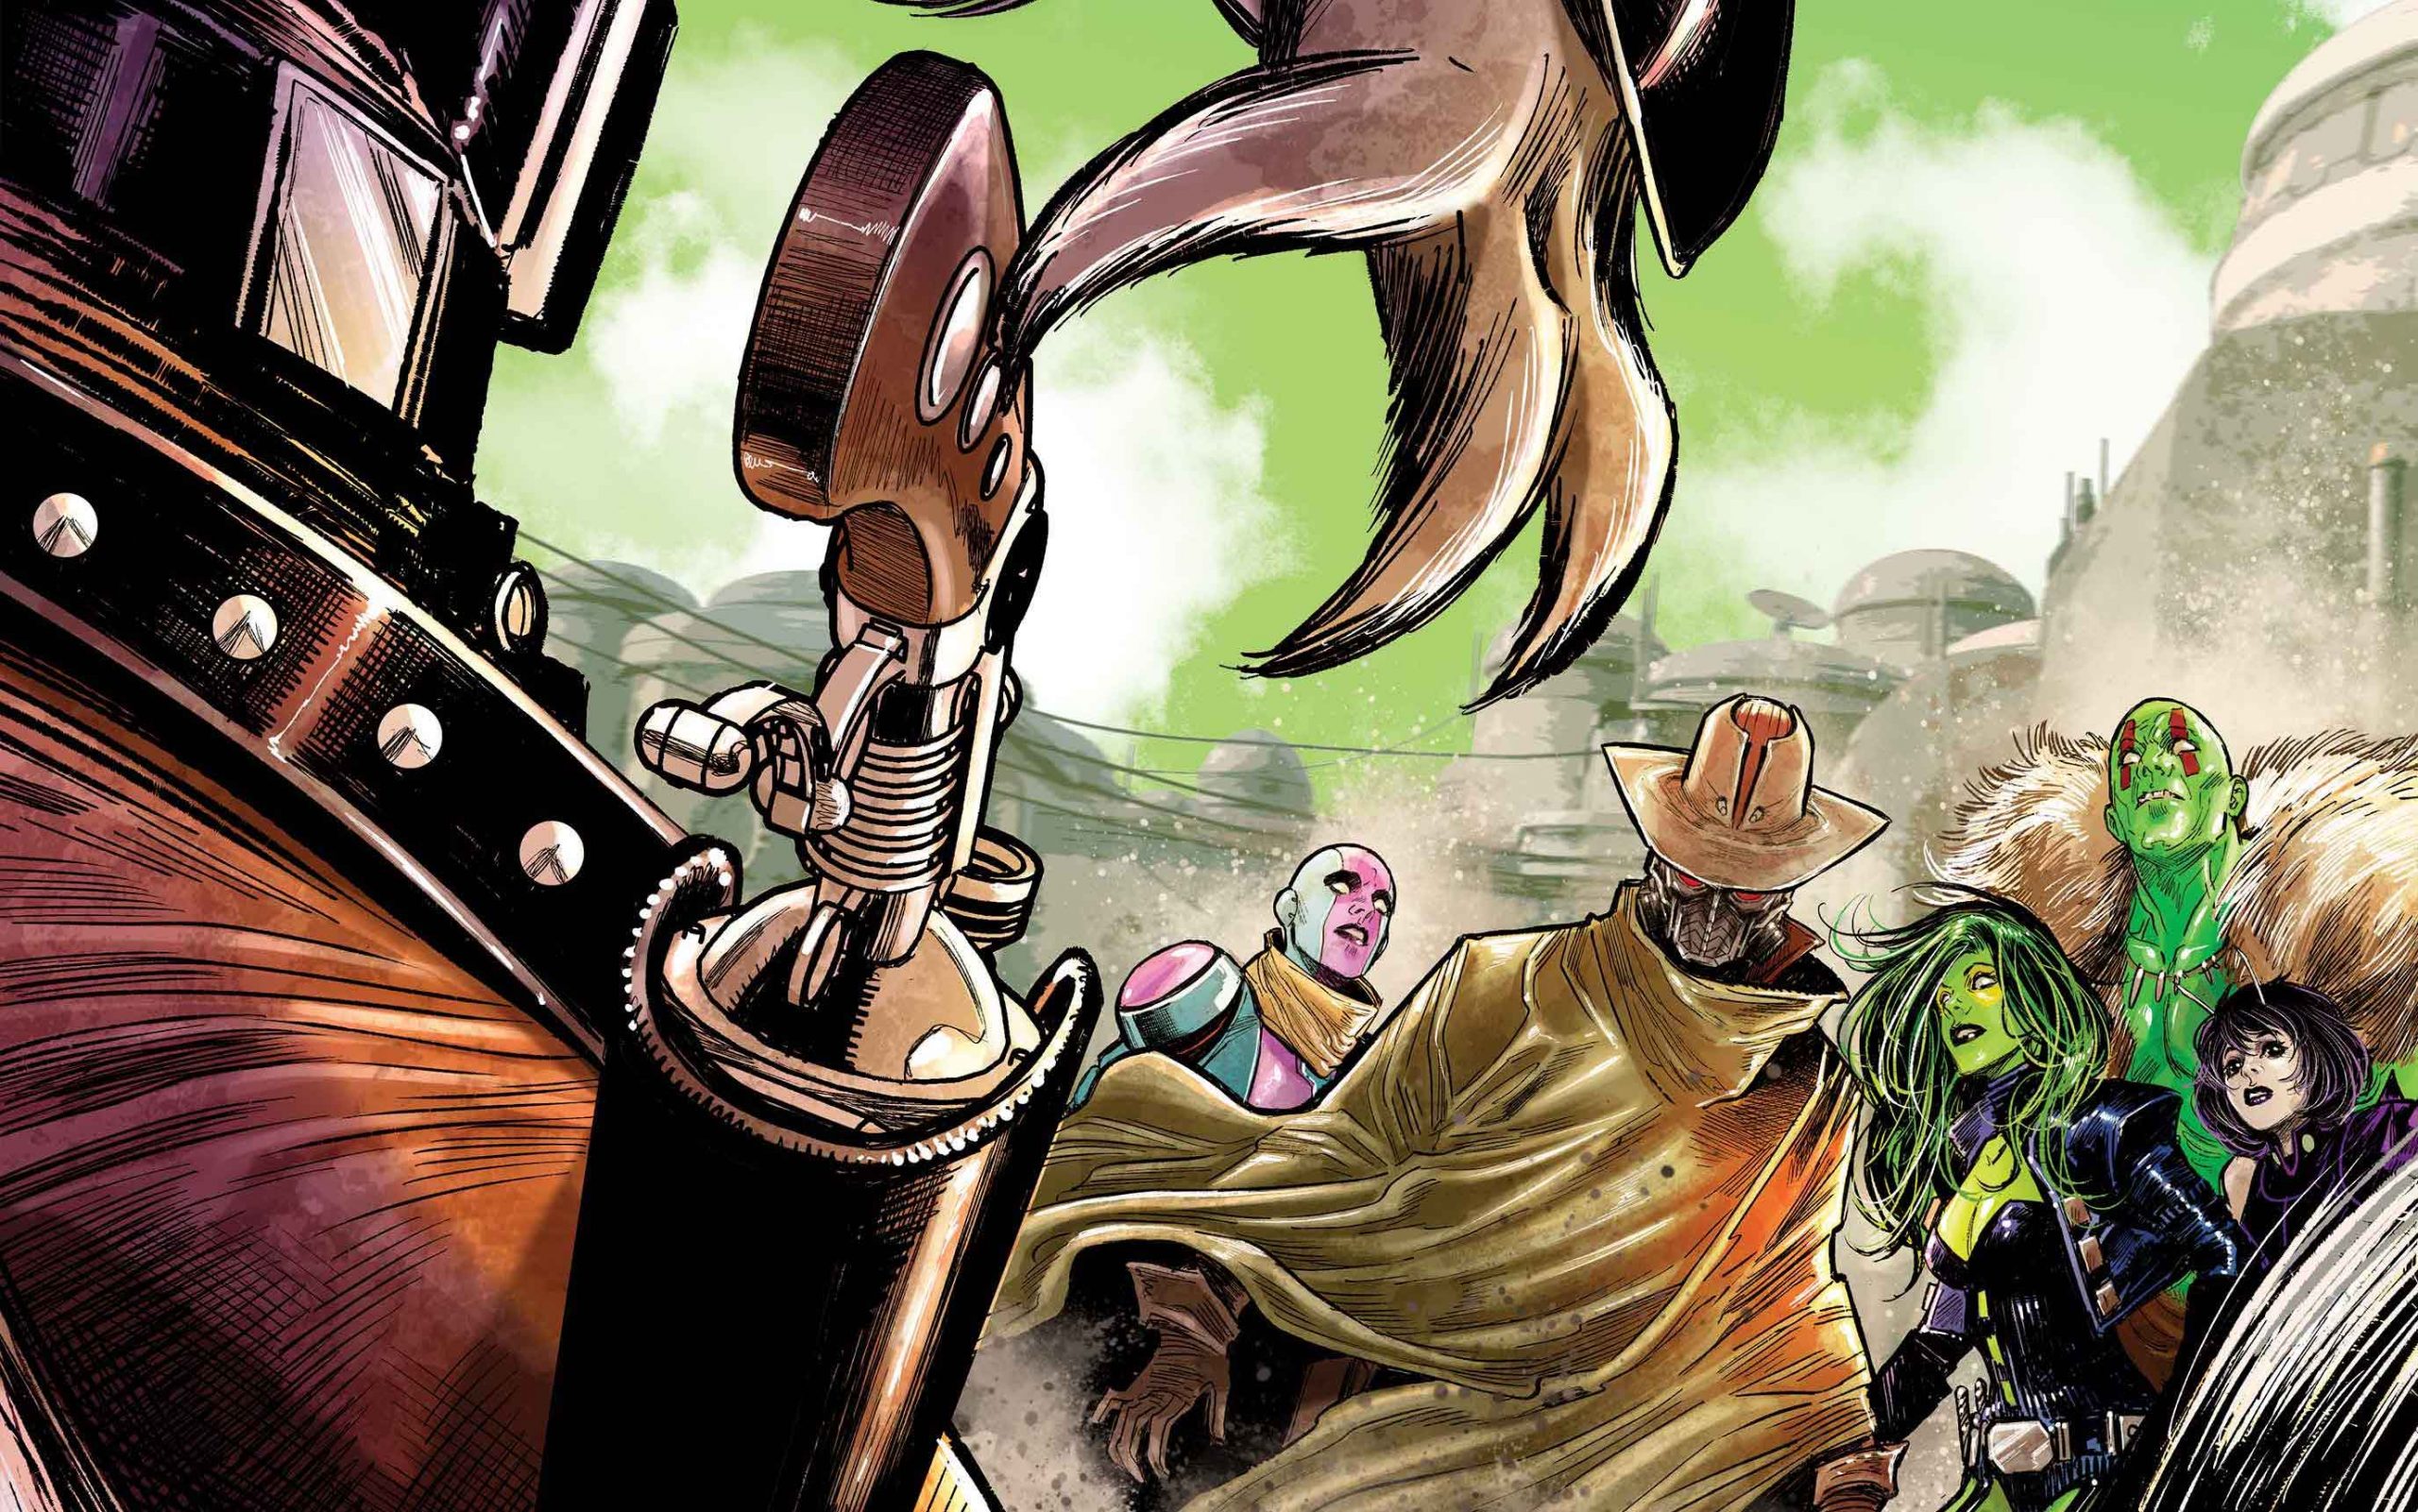 Marvel signals the return of Rocket Raccoon in 'Guardians of the Galaxy' #4